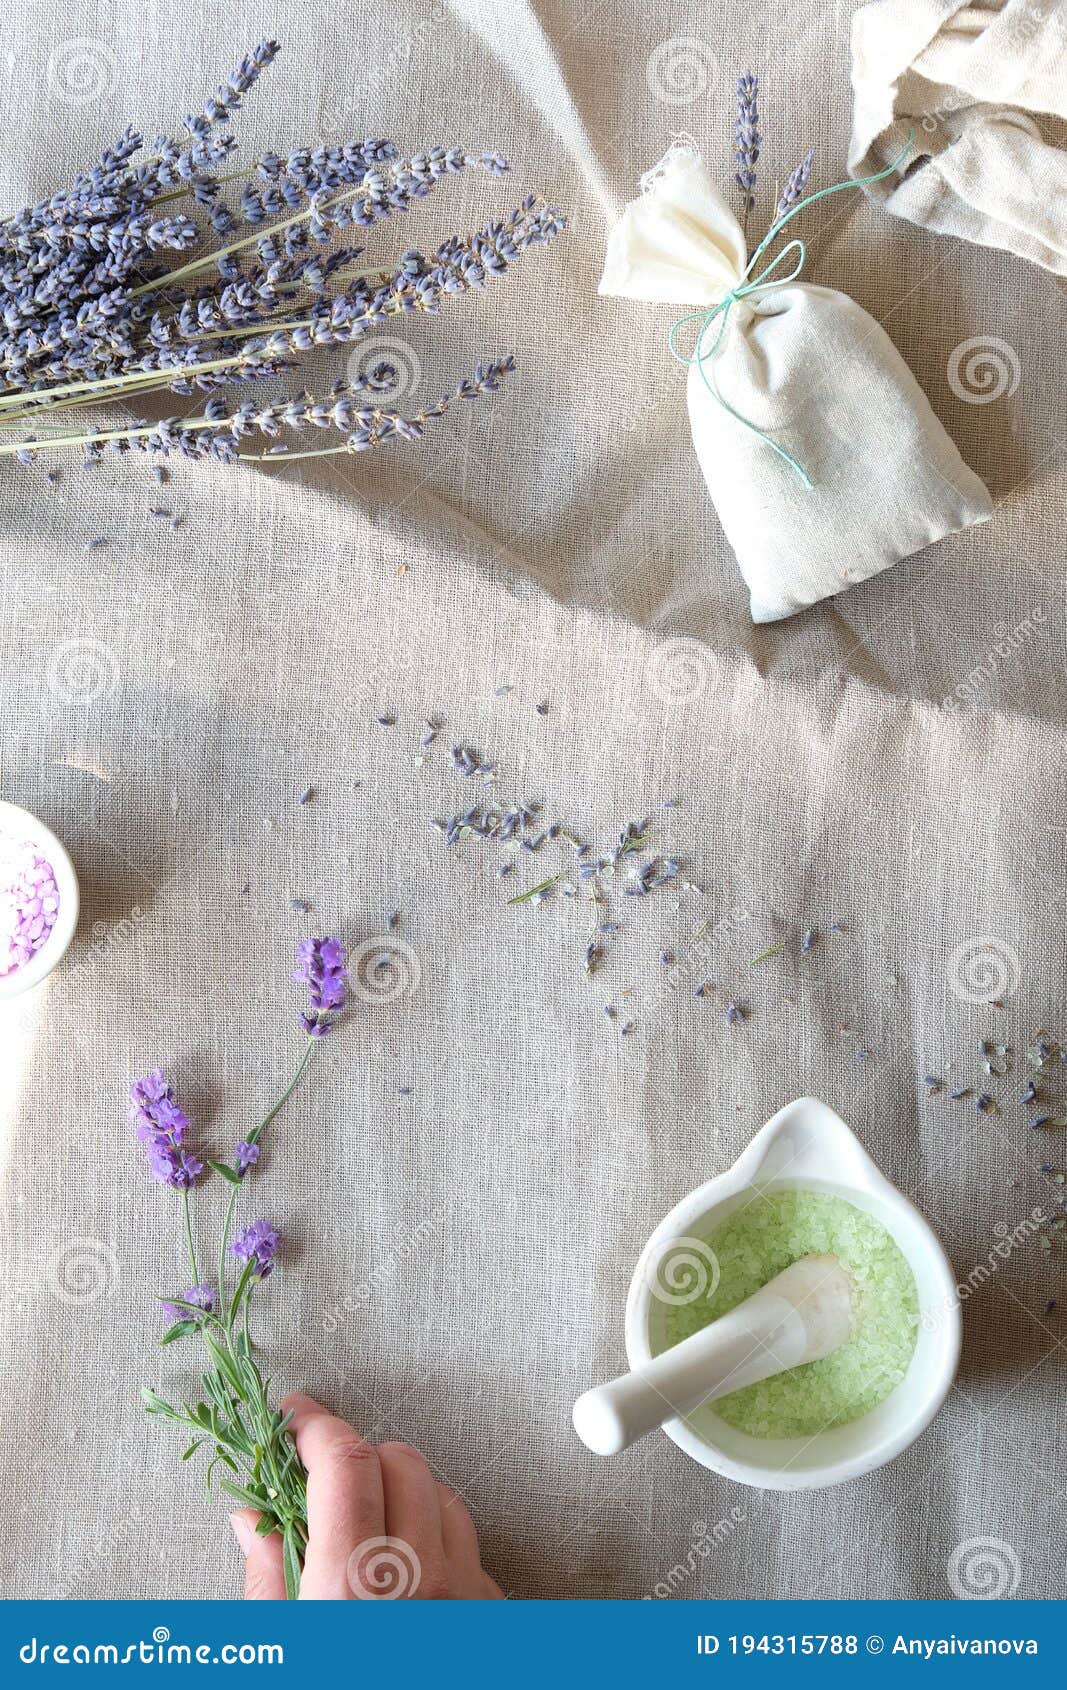 Amazon.com: 110g French Lavender Dried Lavender - Sukh Organic Lavender  Sachets for Drawers and Closets Lavender Flowers Sachet Bags Fresh Scents Lavender  Sachet Bags Dried Flowers Bulk : Beauty & Personal Care